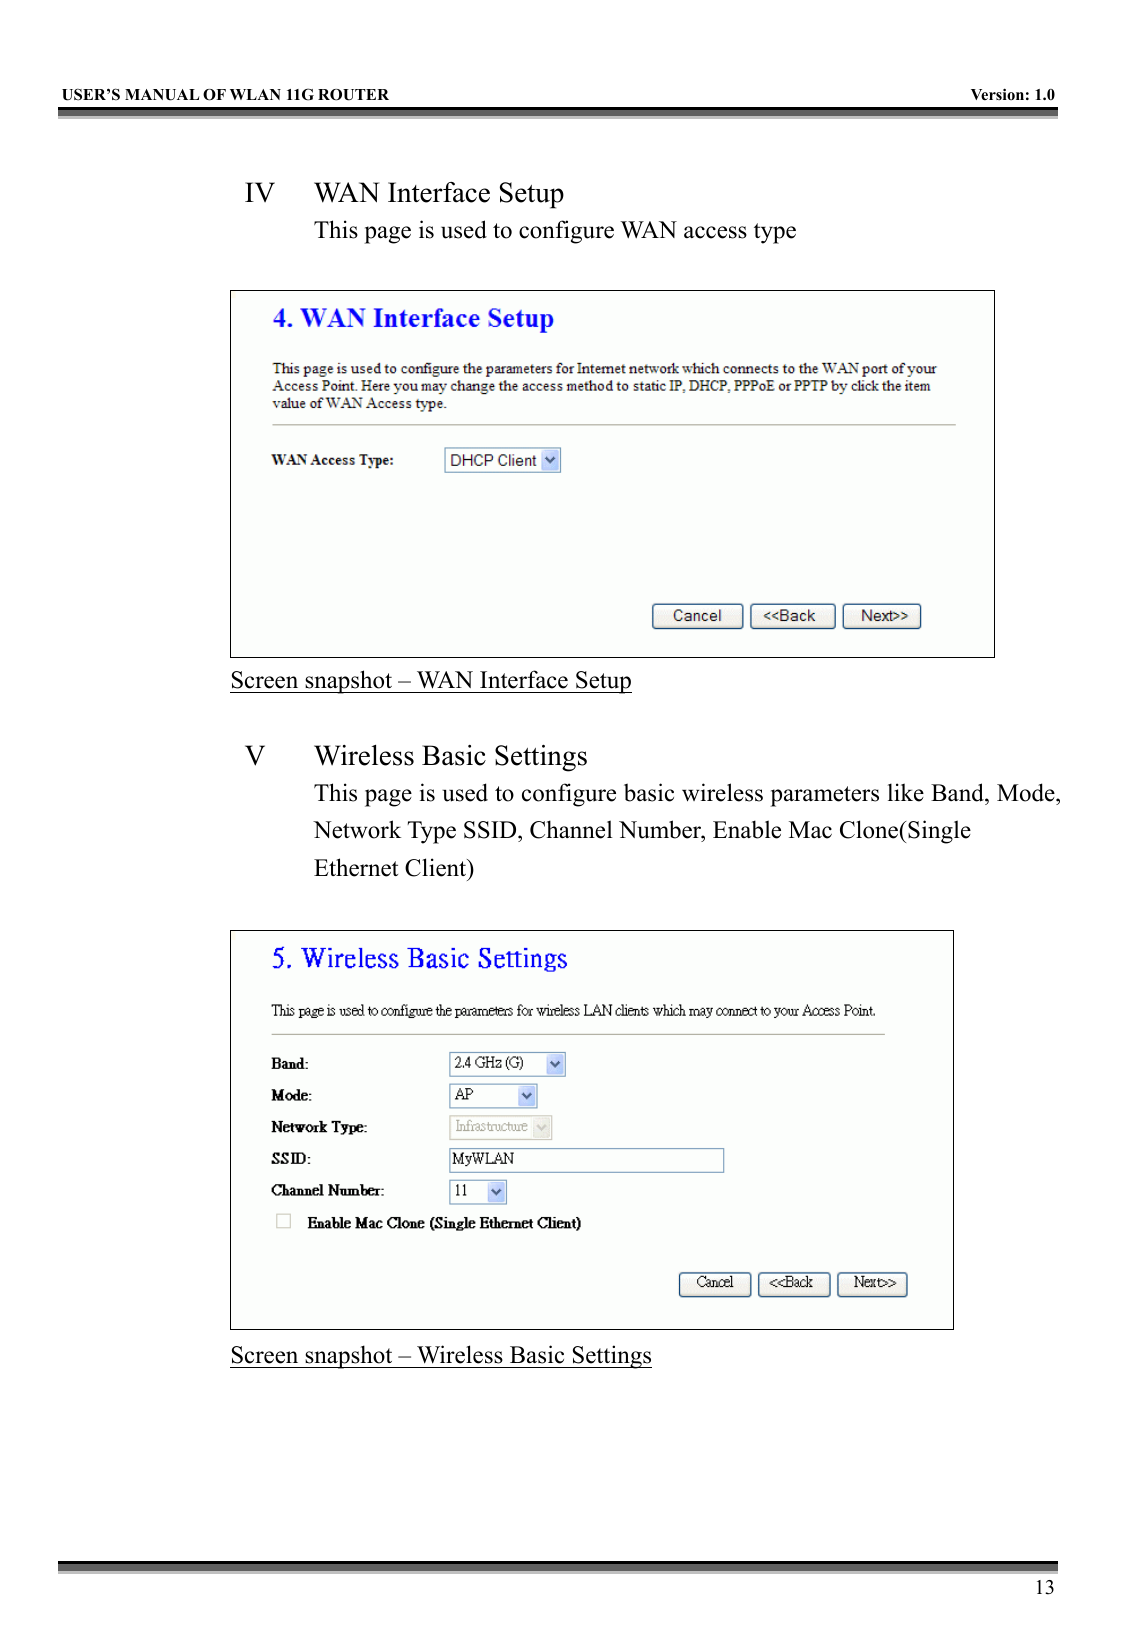   USER’S MANUAL OF WLAN 11G ROUTER    Version: 1.0     13  IV  WAN Interface Setup This page is used to configure WAN access type   Screen snapshot – WAN Interface Setup  V  Wireless Basic Settings This page is used to configure basic wireless parameters like Band, Mode, Network Type SSID, Channel Number, Enable Mac Clone(Single Ethernet Client)   Screen snapshot – Wireless Basic Settings  